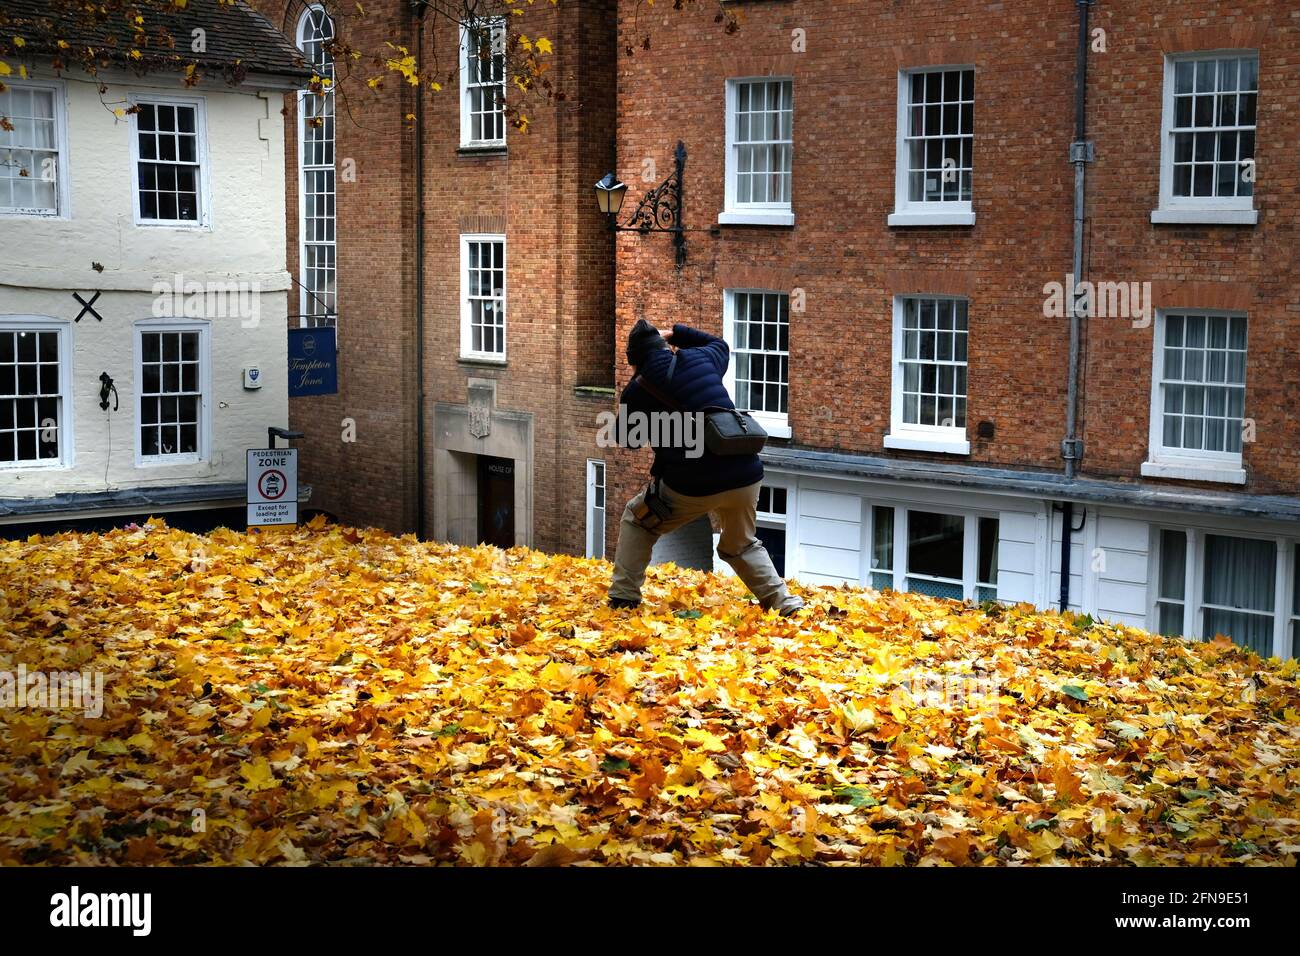 A male photographer raises a camera to compose a photograph in the churchyard of Old St Chad's, Shrewsbury, Shropshire, He compses a picture of the corner of College Hill and Princess Street Stock Photo